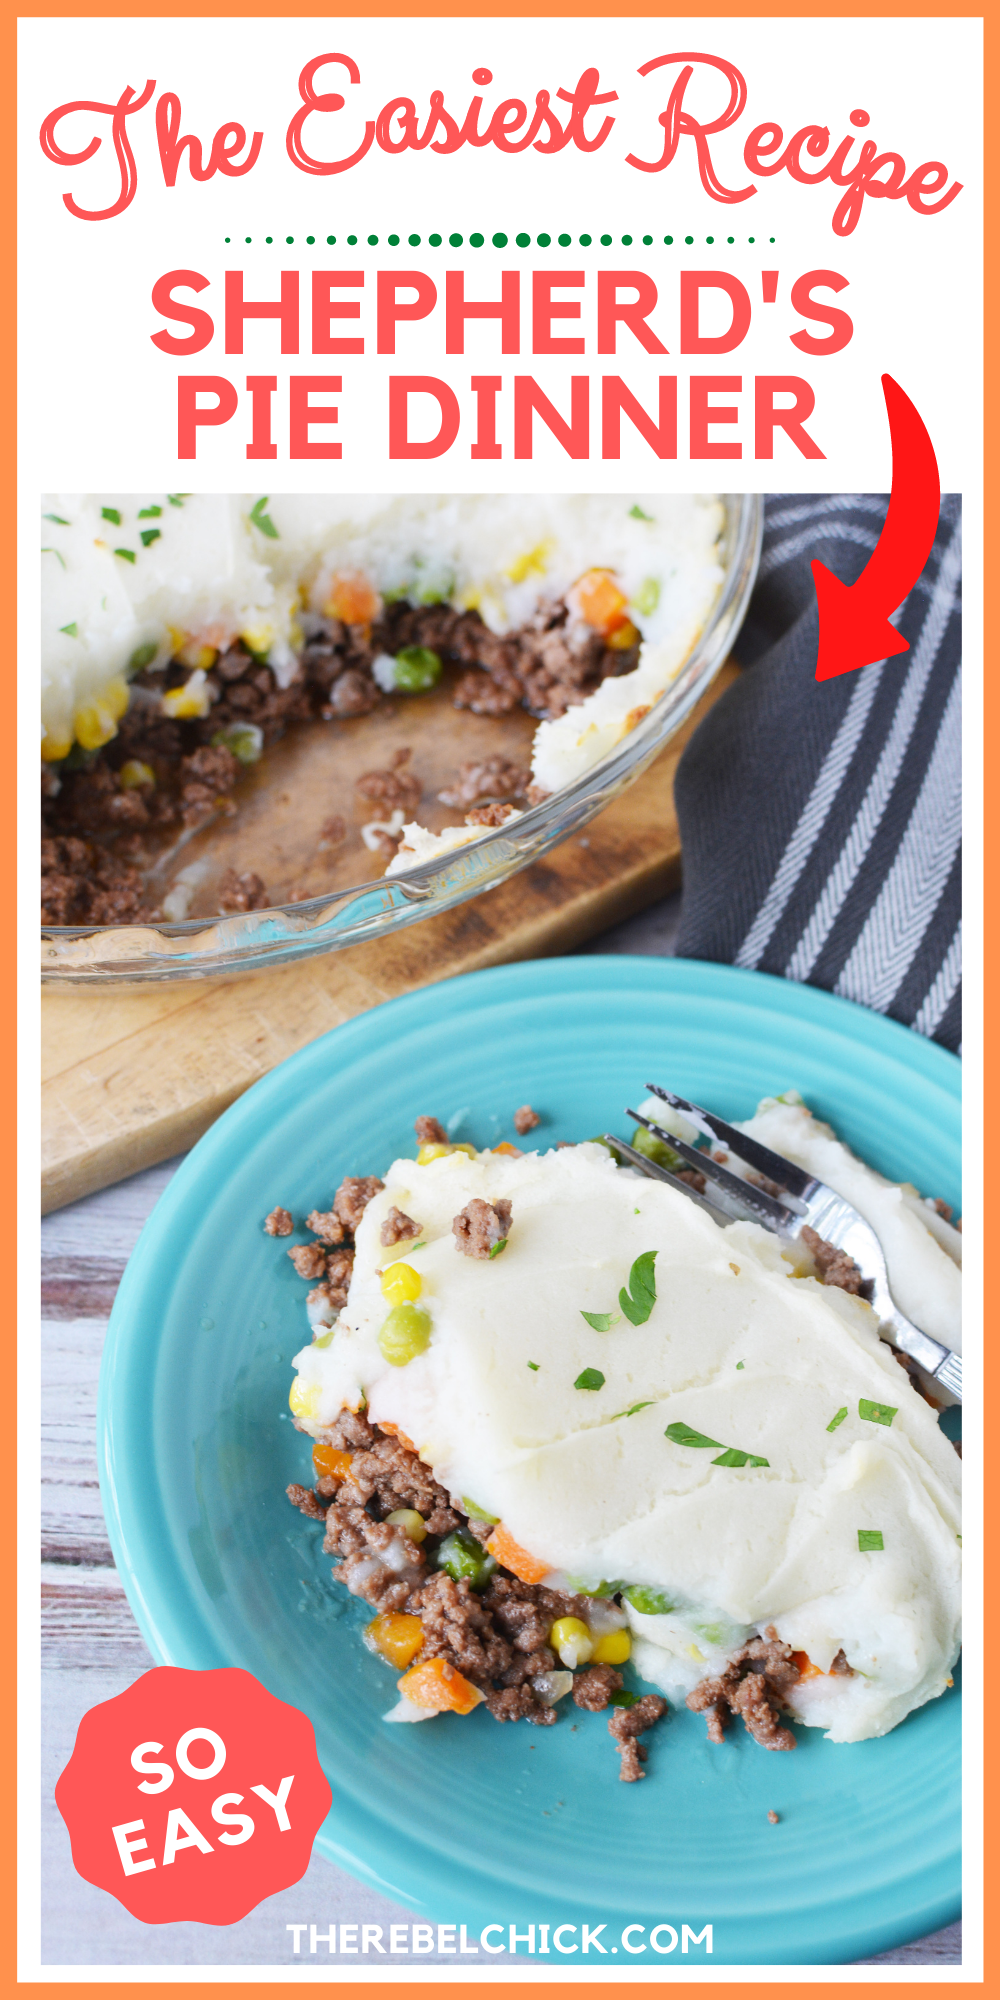 How to Make The Easiest Recipe for Shepherd's Pie